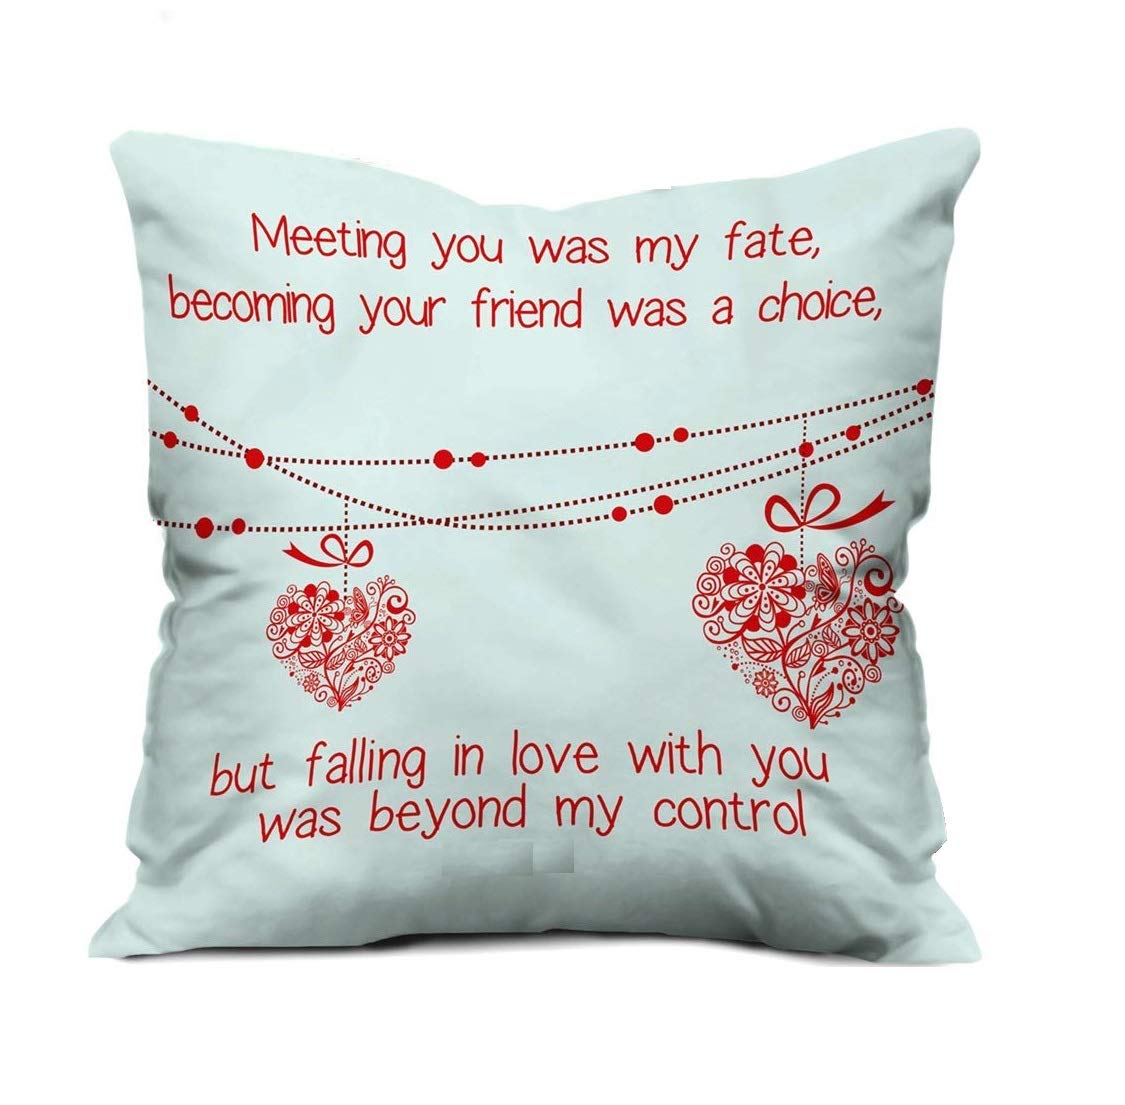 Cushion Cover: Designer Decorative Anniversary Valentines Day Love Gifting Heart Throw Pillow Cushion Cover